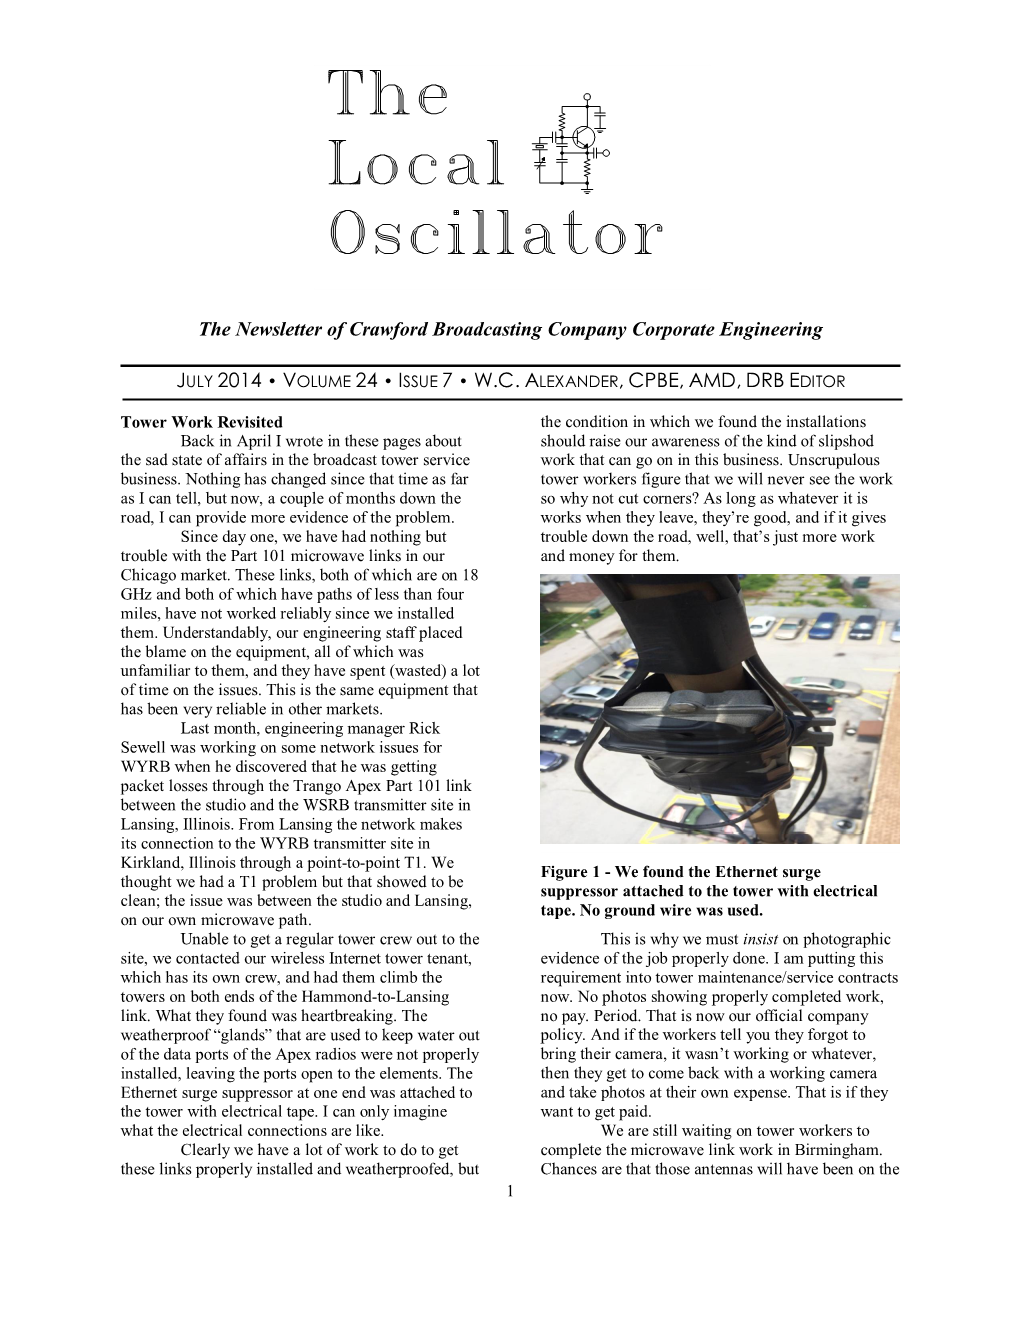 The Newsletter of Crawford Broadcasting Company Corporate Engineering